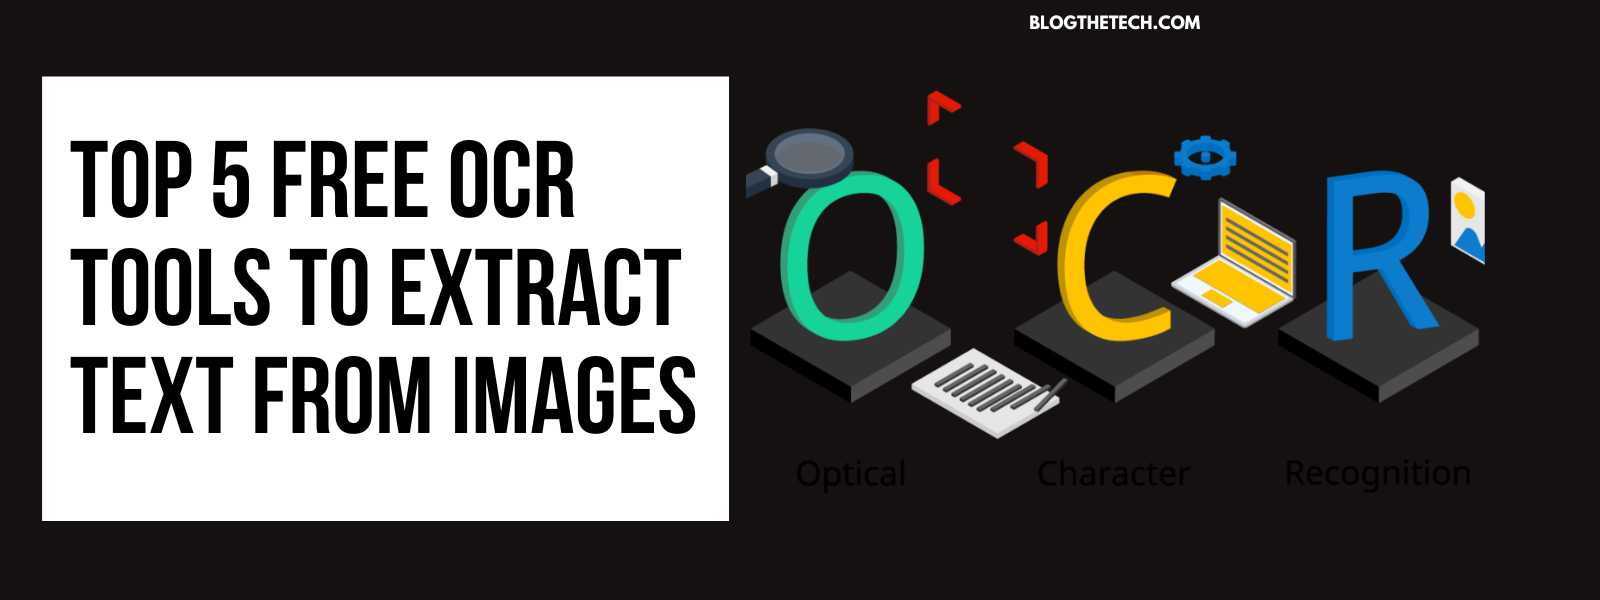 Top 5 Free OCR Tools to extract text from images